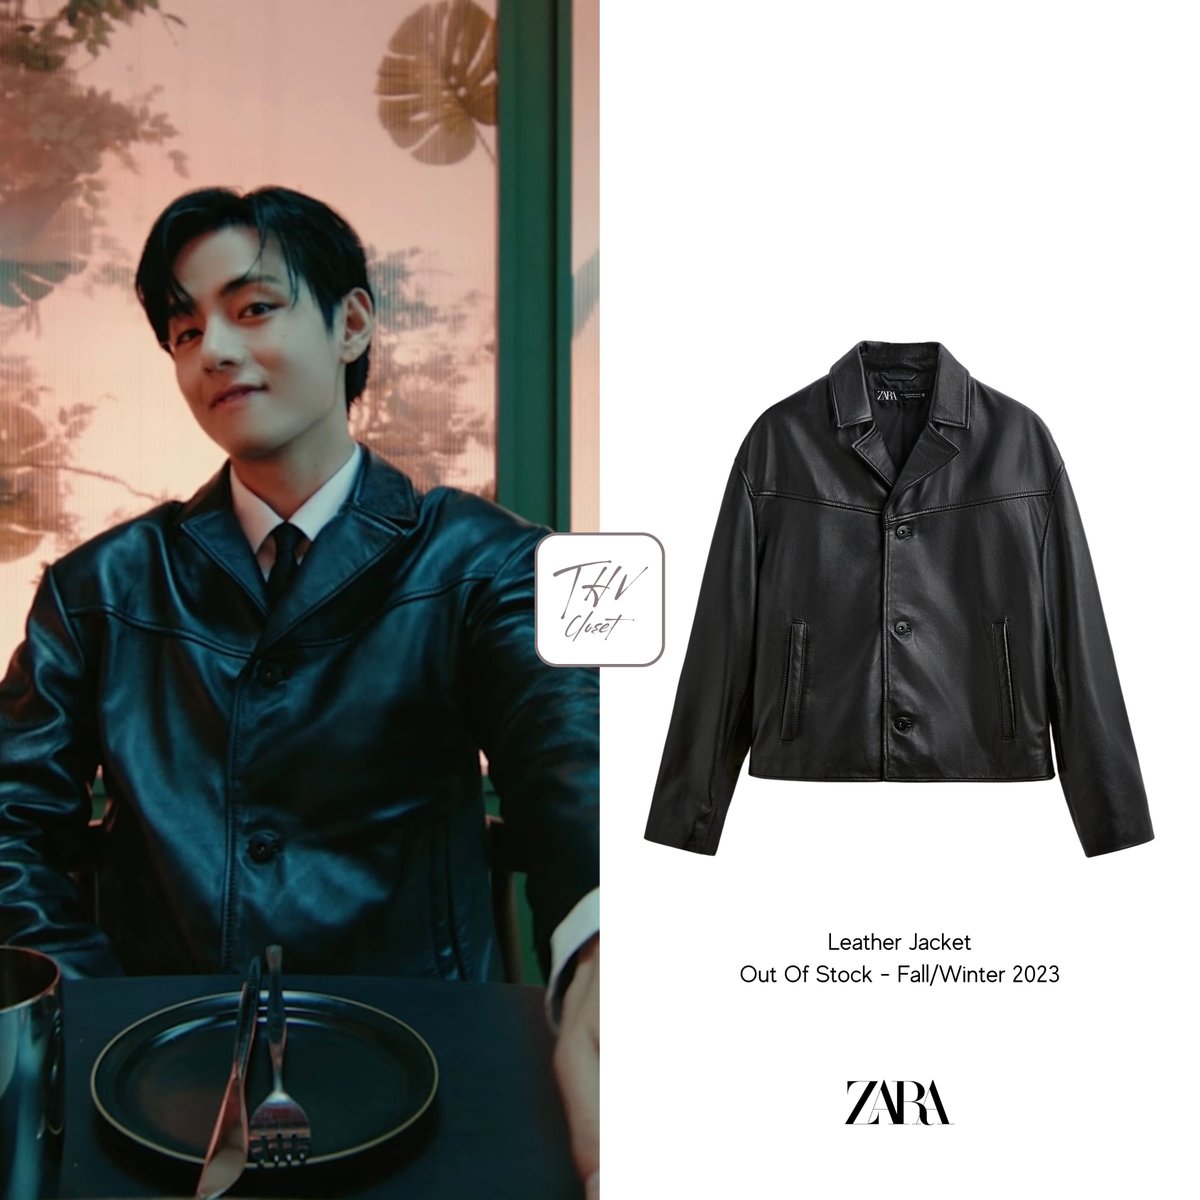 2024.03.01 | 'SimInvest' CF - 'V and Jackie Chan are now #ExperienceLimitlessWithSimInvest'| Kim Taehyung wearing: 

- Leather Jacket by Zara
 
#KimTaehyungCloset #thvcloset #BTSV #V #뷔